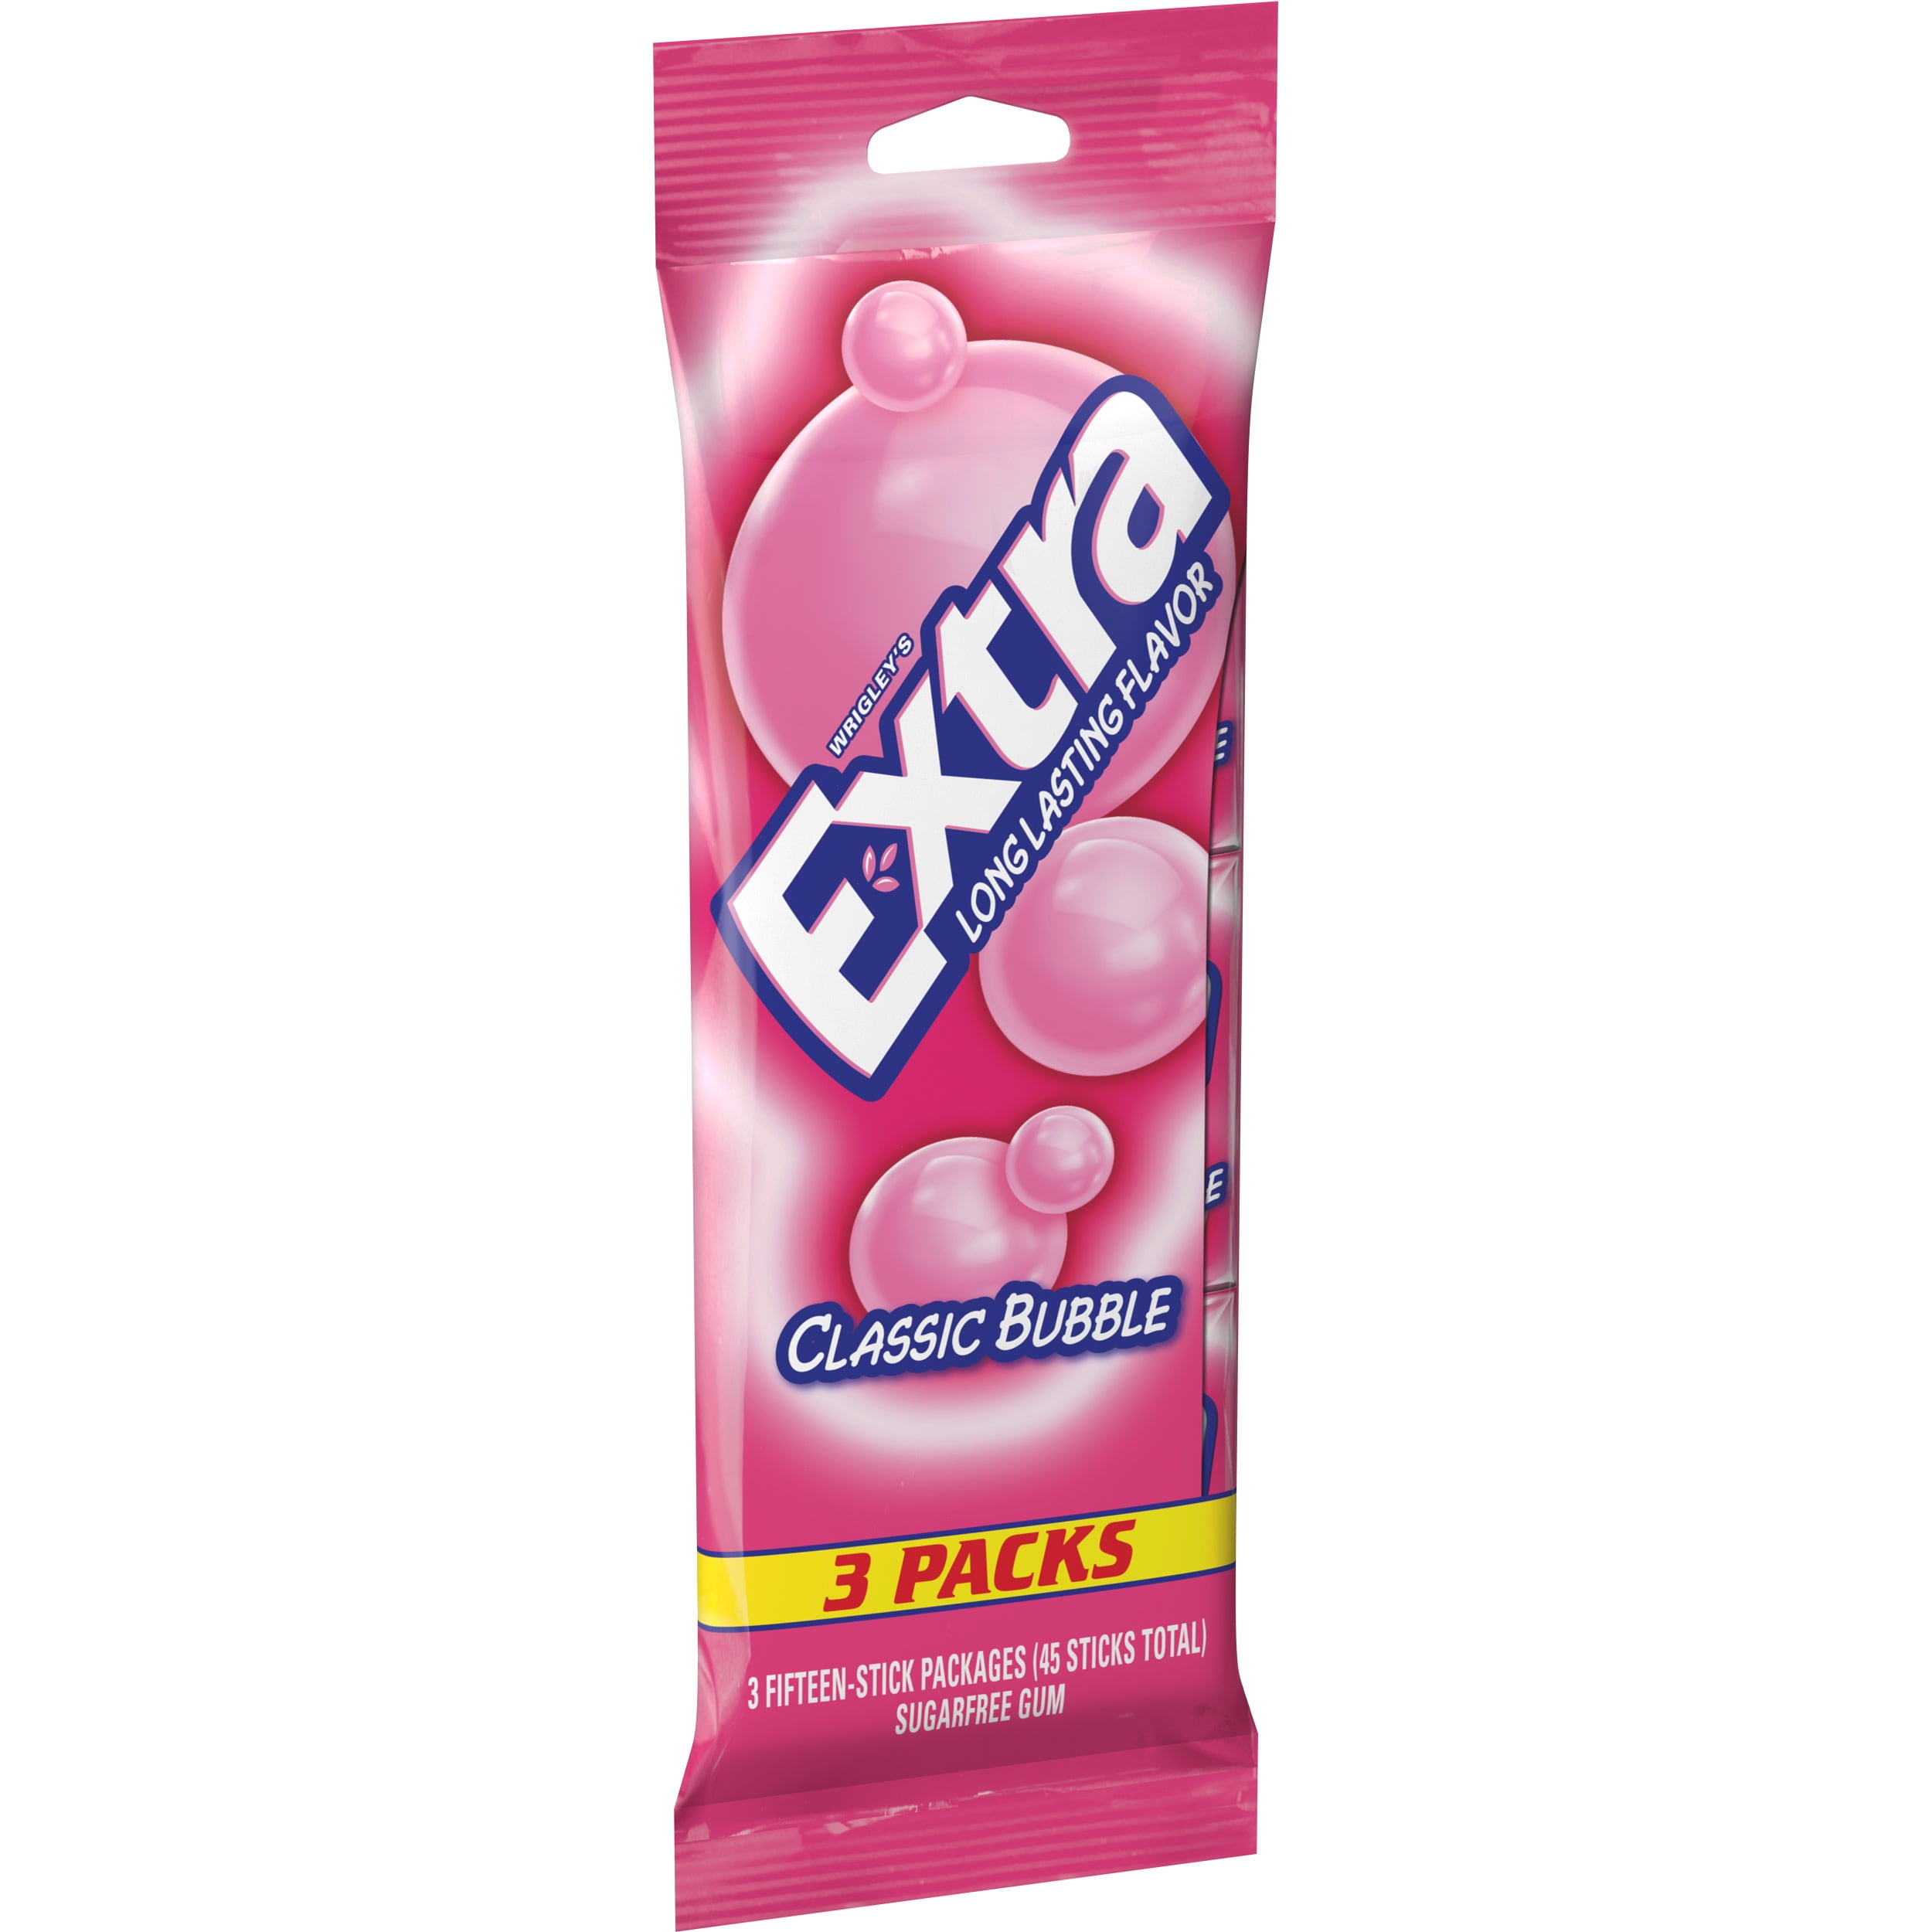 Extra Classic Bubble Gum Sugar Free Back to School Chewing Gum- Pack 